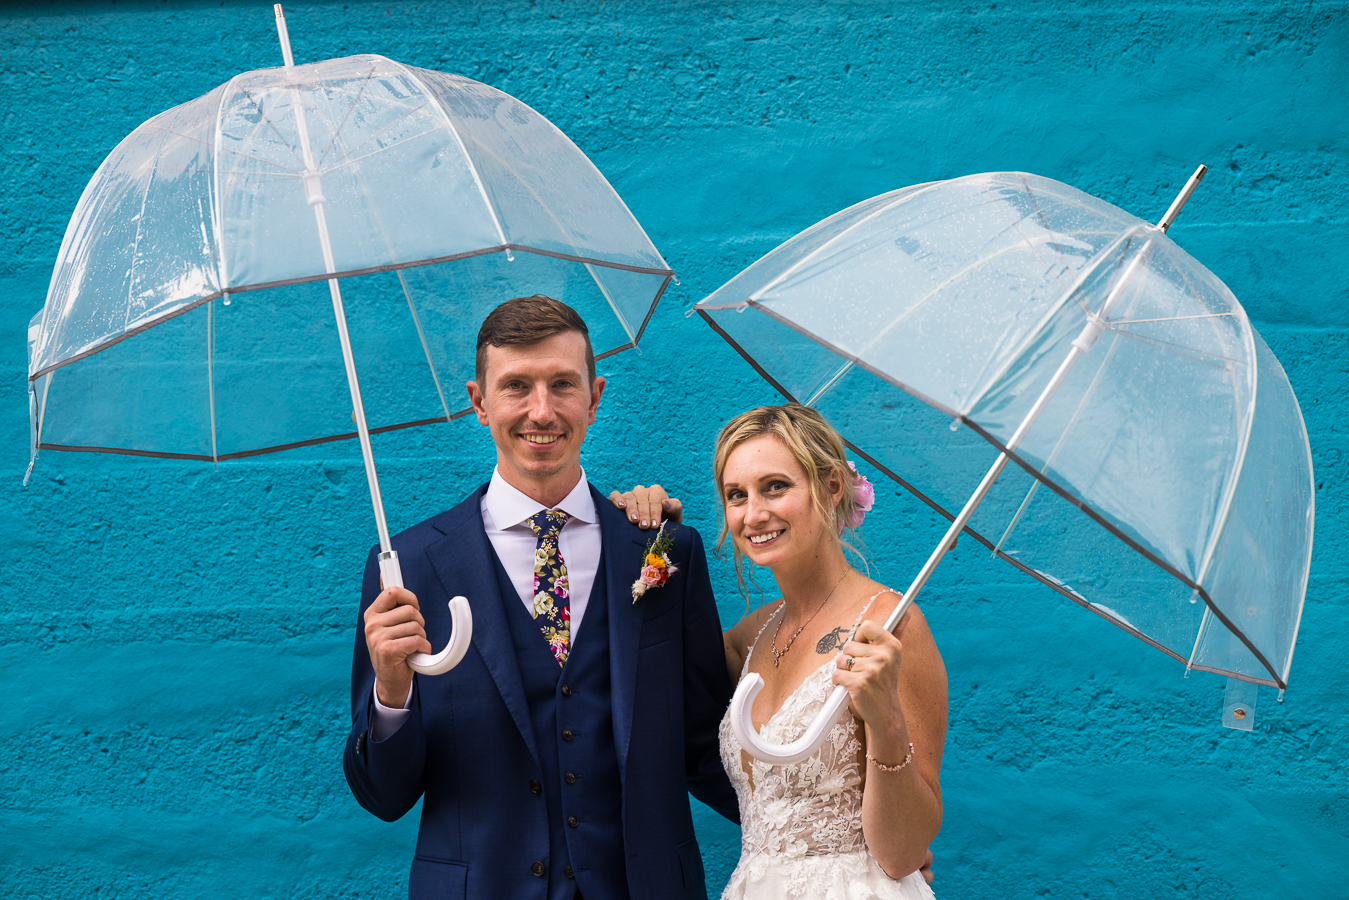 creative wedding photographer, lisa rhinehart, captures this vibrant, fun image of the bride and groom holding clear umbrellas as they stand next to one another in front of a vibrant blue wall 